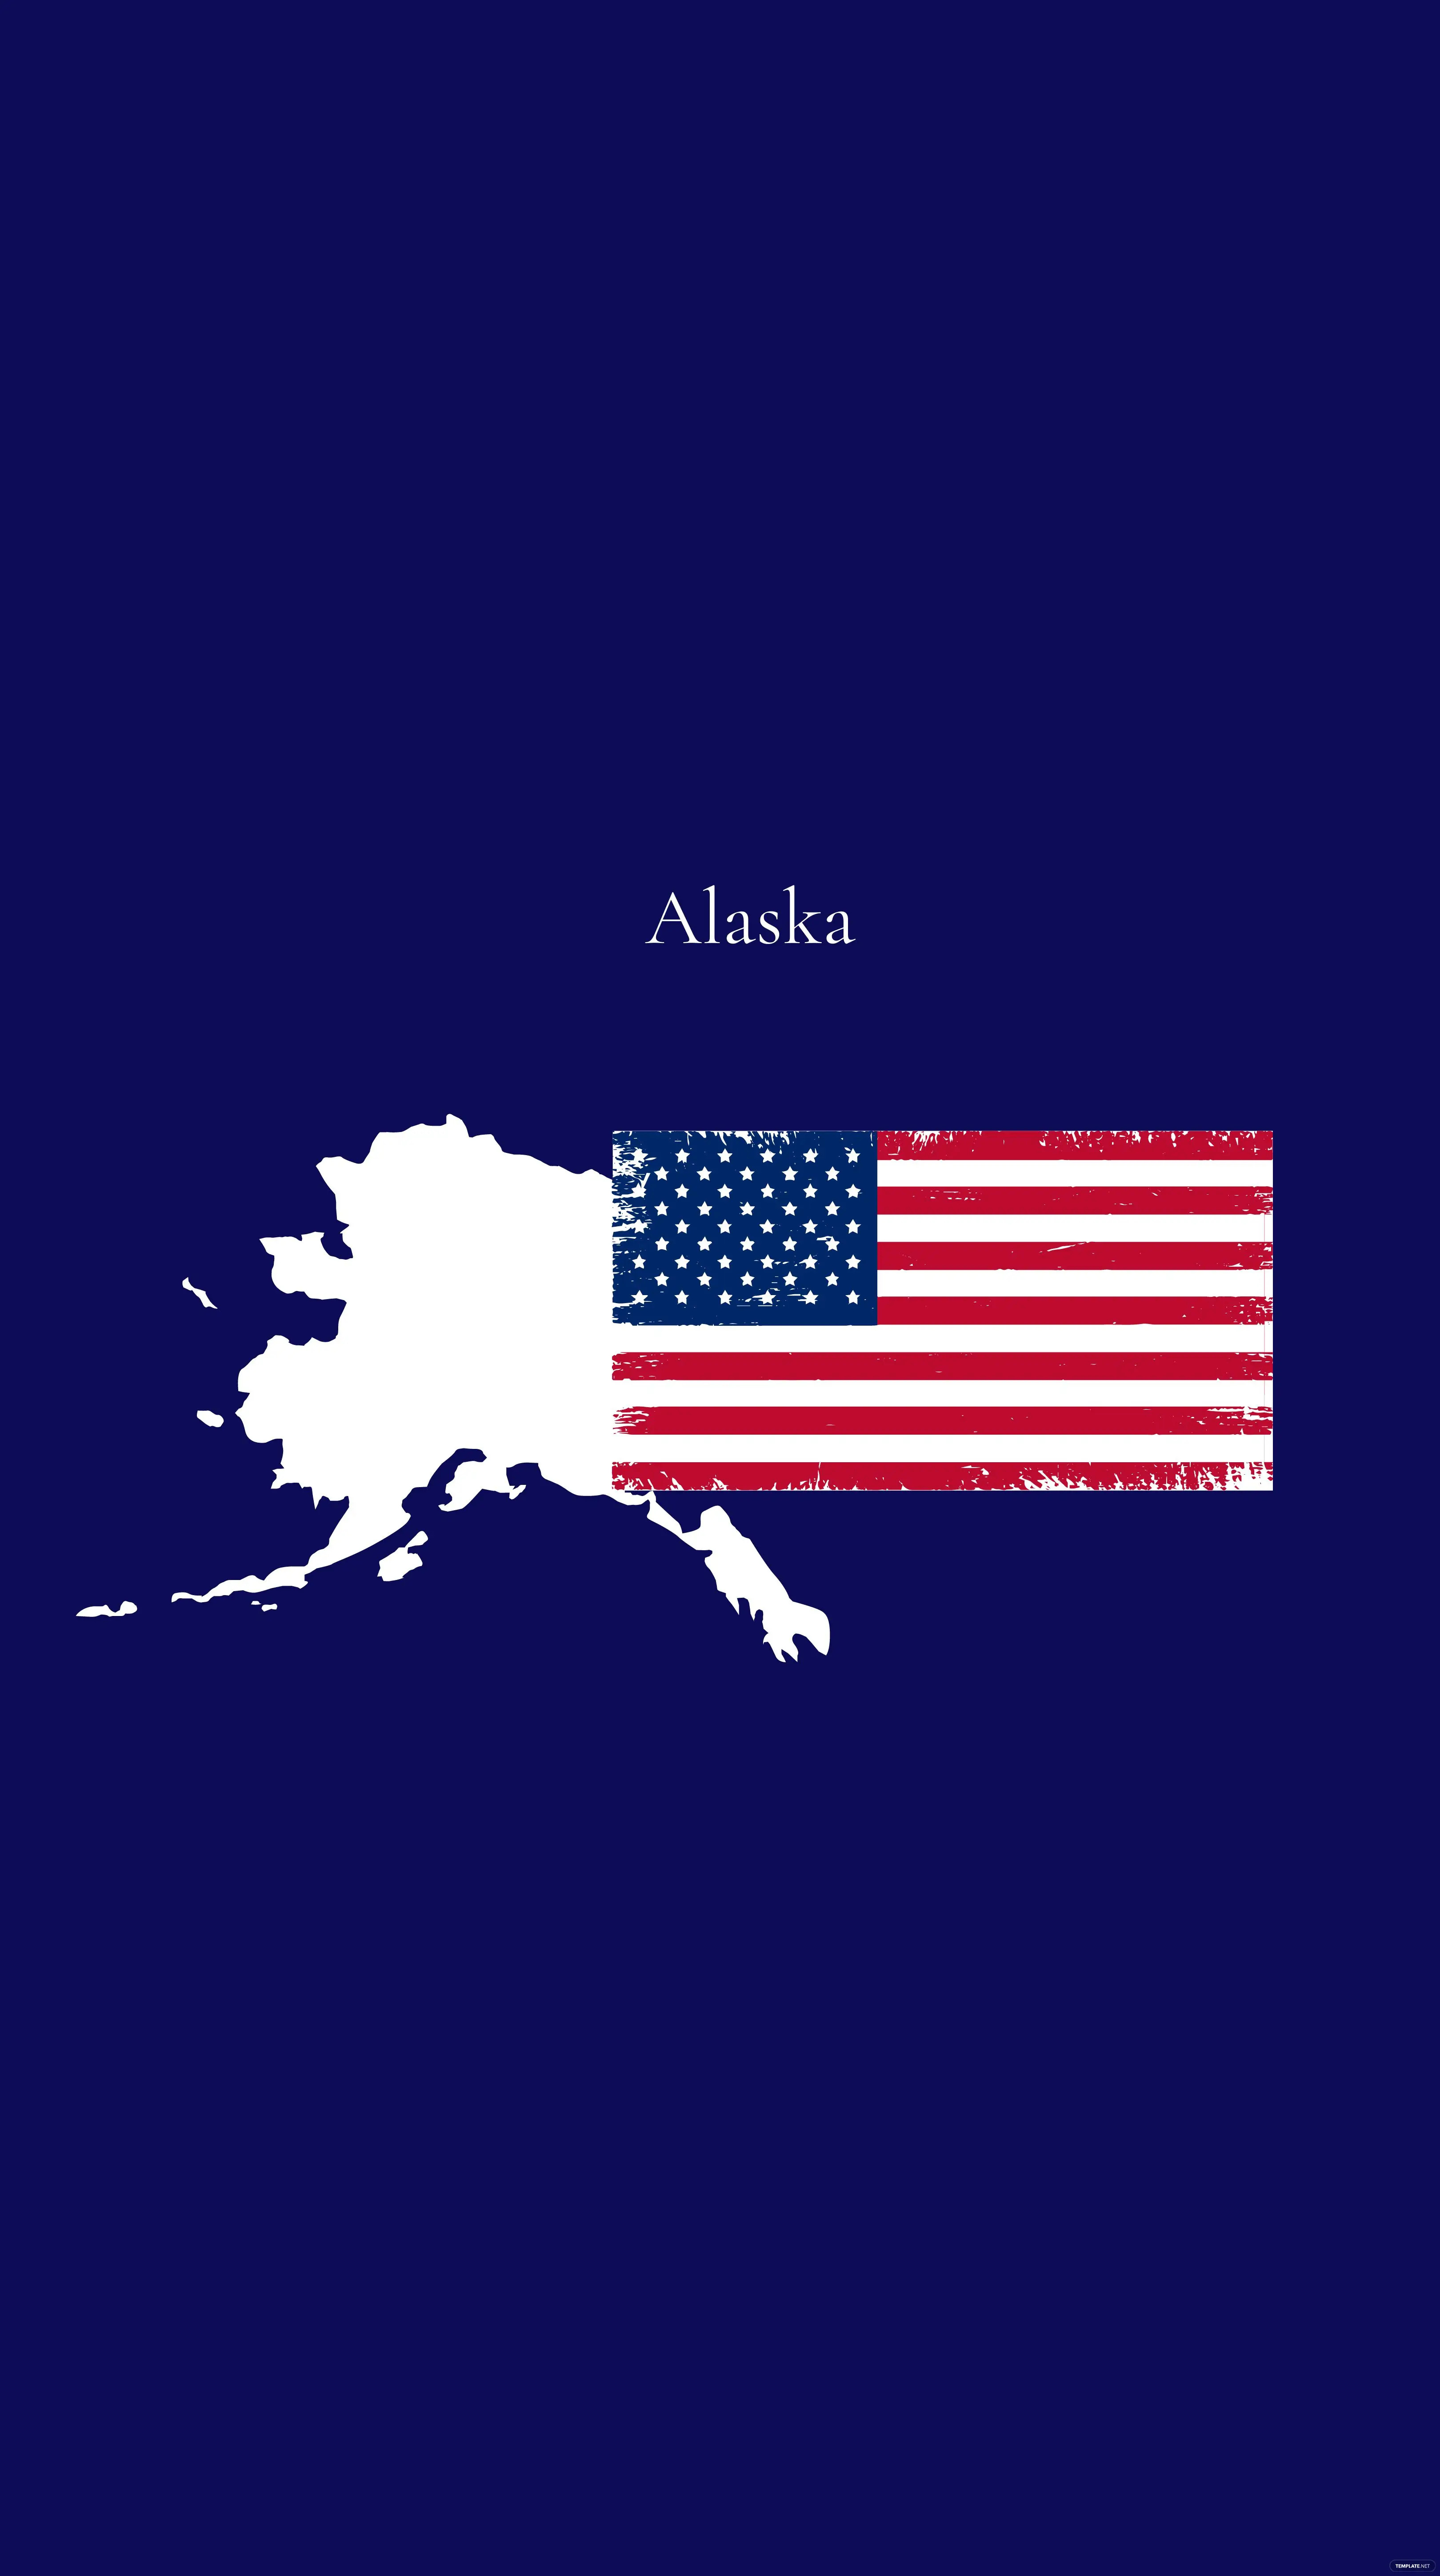 alaska day iphone wallpaper ideas and examples